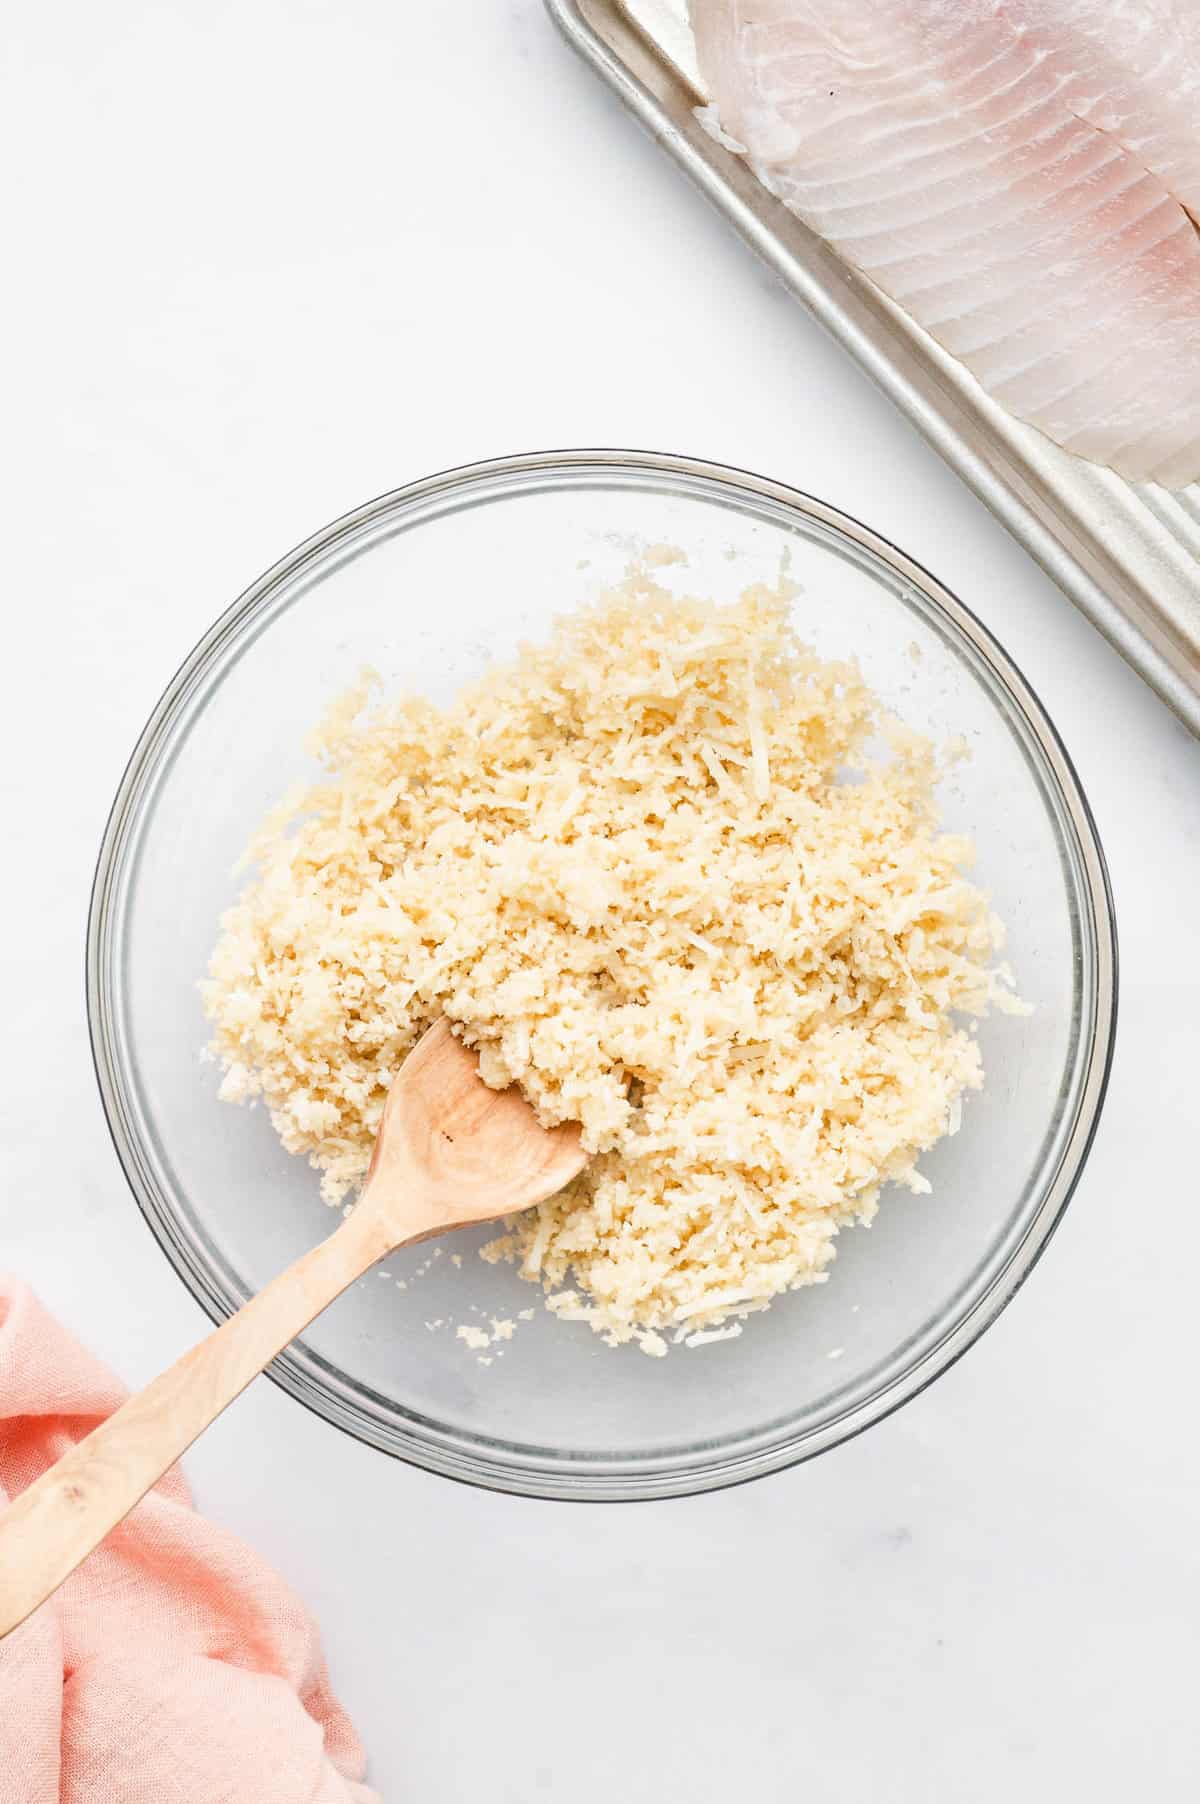 Combined ingredients in mixing bowl for Parmesan Crusted Tilapia recipe